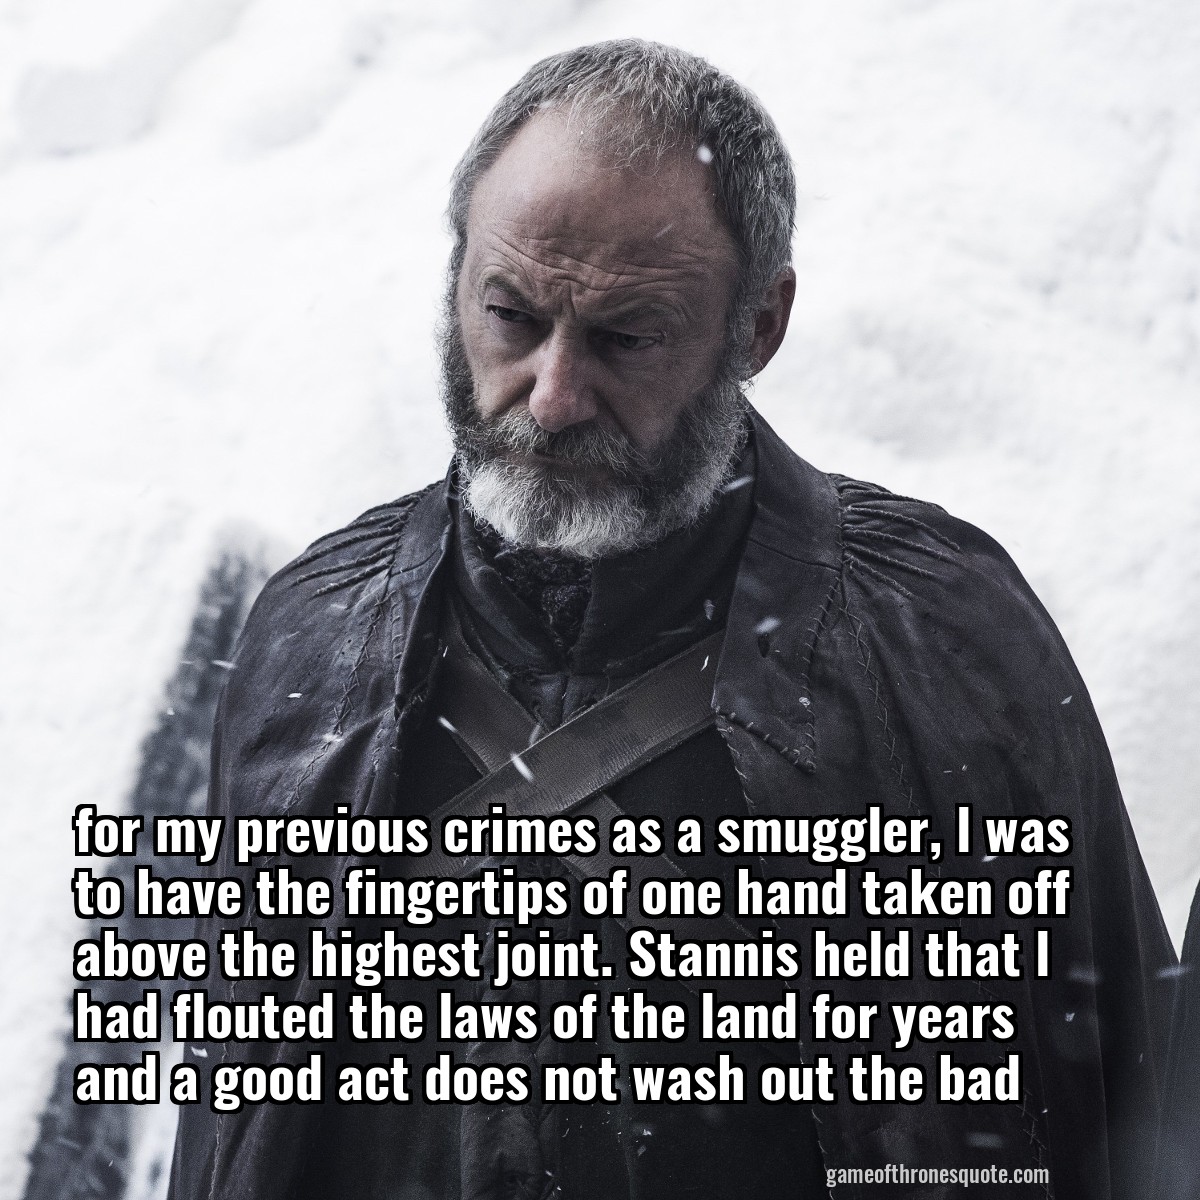 for my previous crimes as a smuggler, l was to have the fingertips of one hand taken off above the highest joint. Stannis held that l had flouted the laws of the land for years and a good act does not wash out the bad